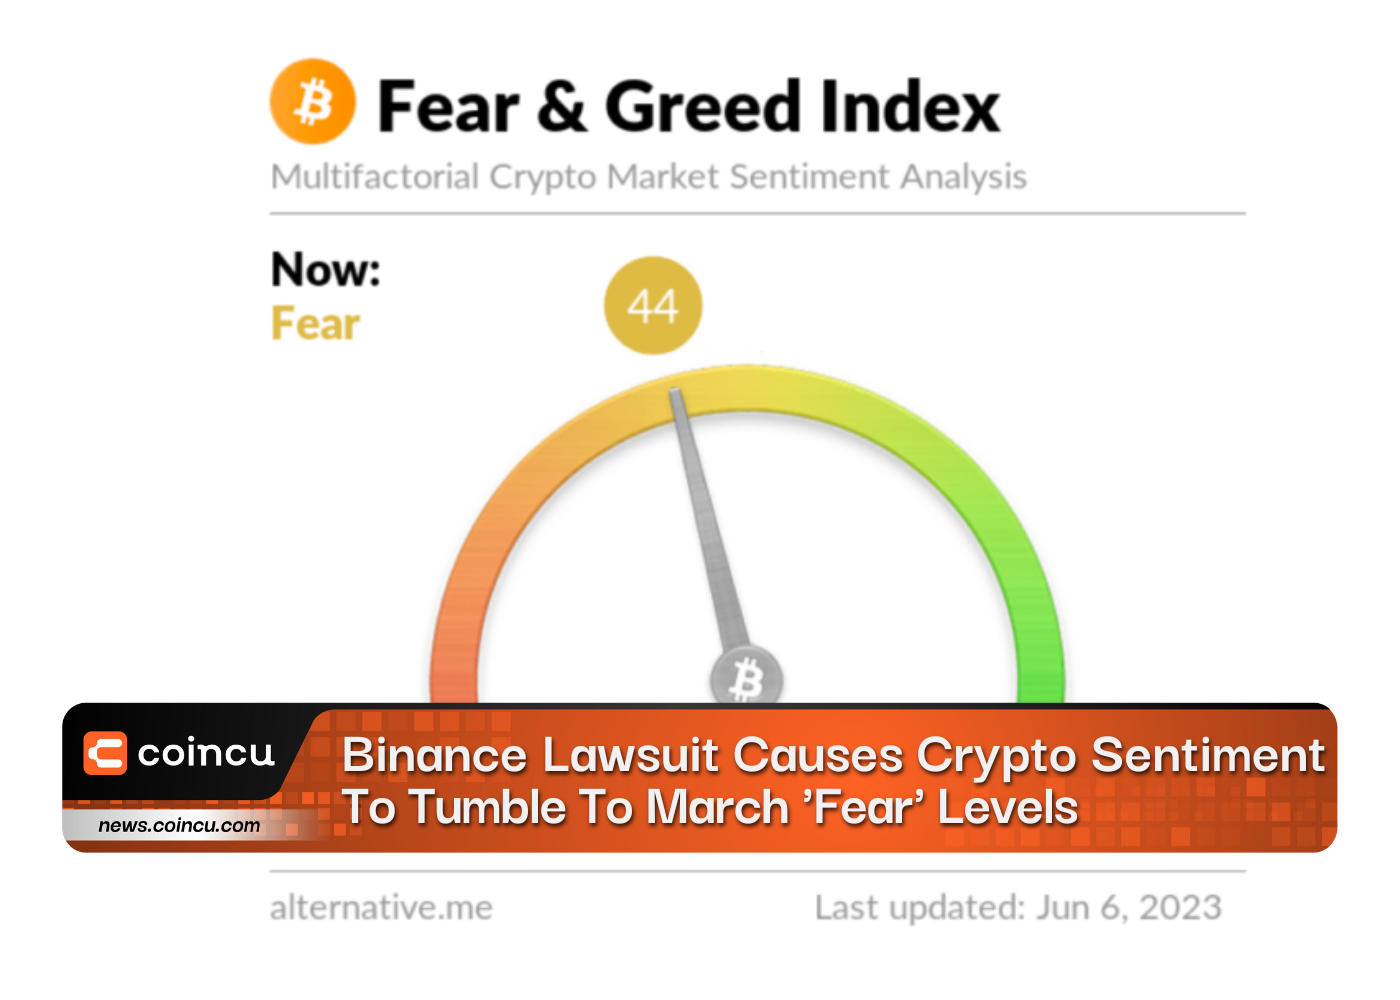 Binance Lawsuit Causes Crypto Sentiment To Tumble To March Fear Levels 1